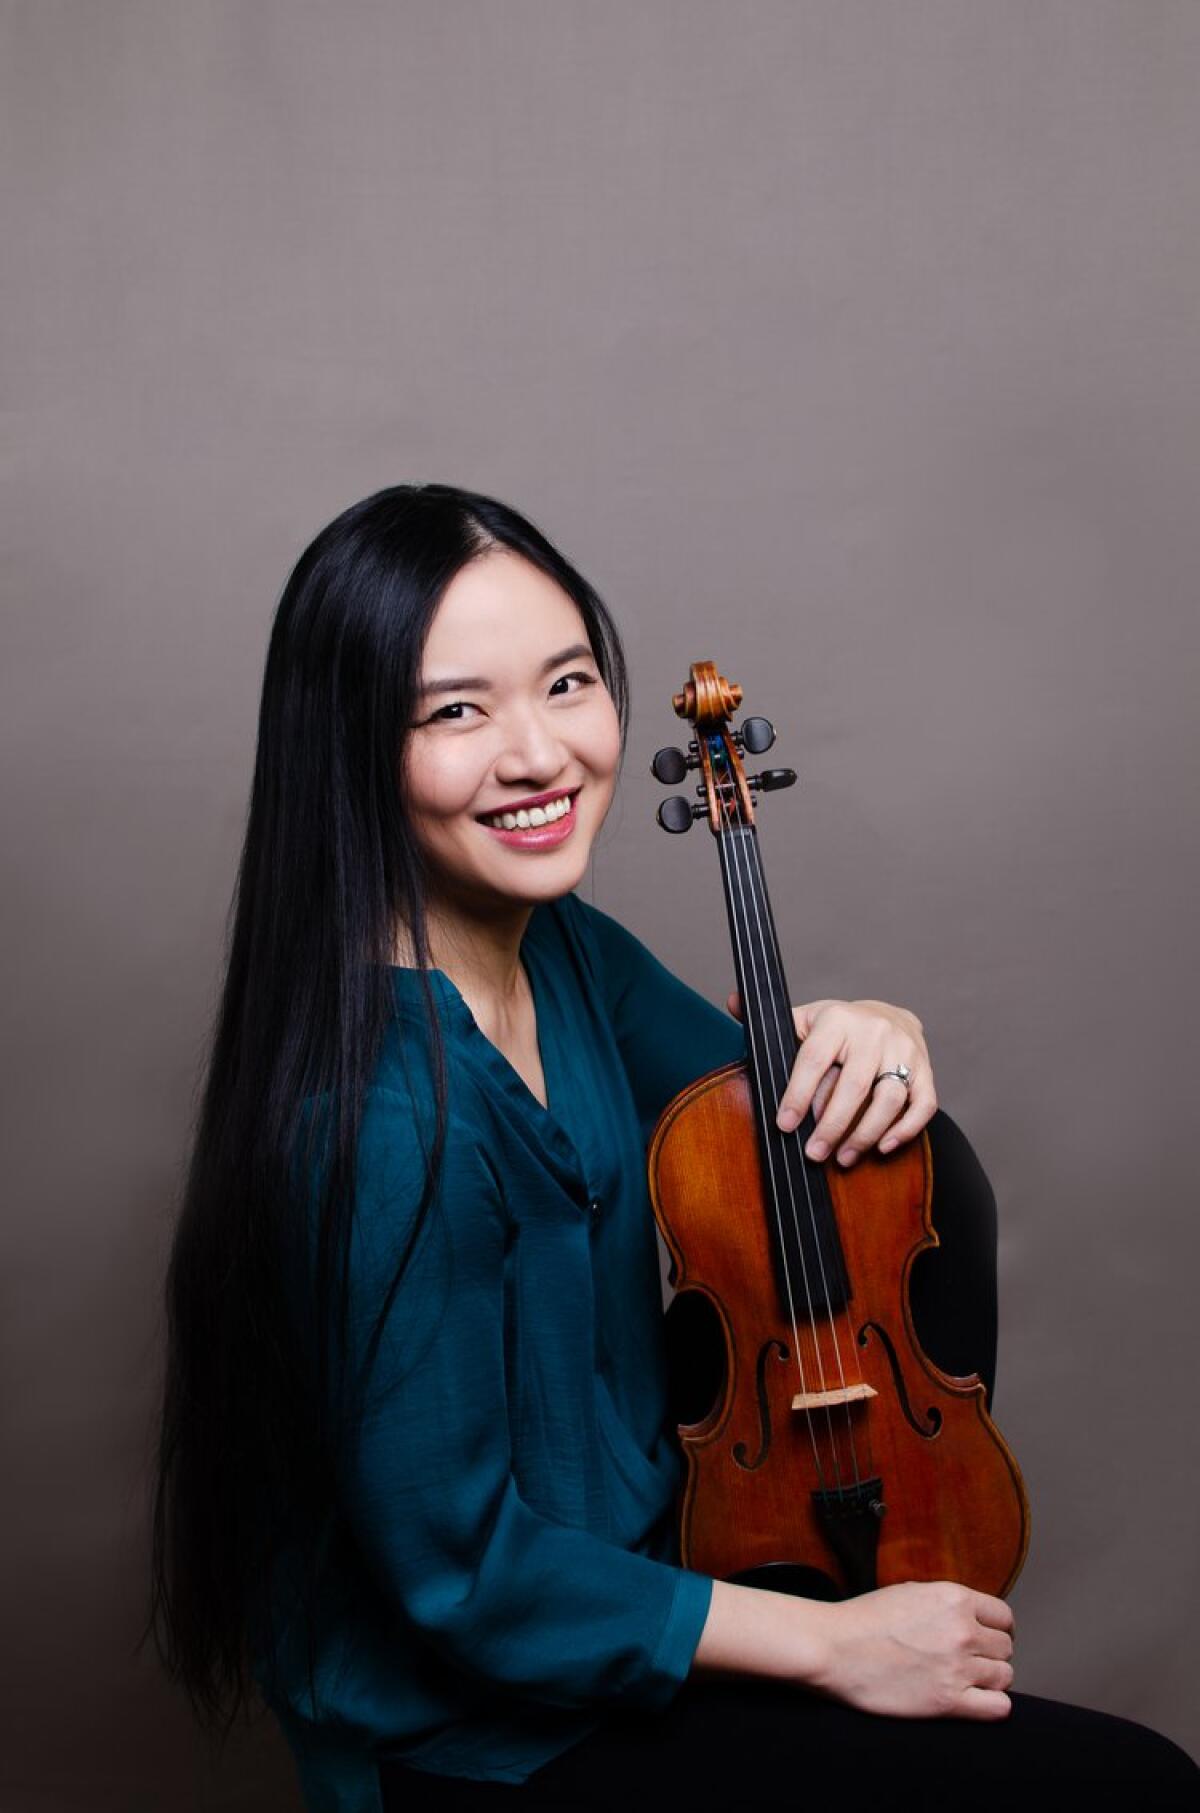 The Athenaeum Music & Arts Library presents Tien-Hsin Cindy Wu along with Hidden Valley Virtuosi on Friday, Oct. 28.